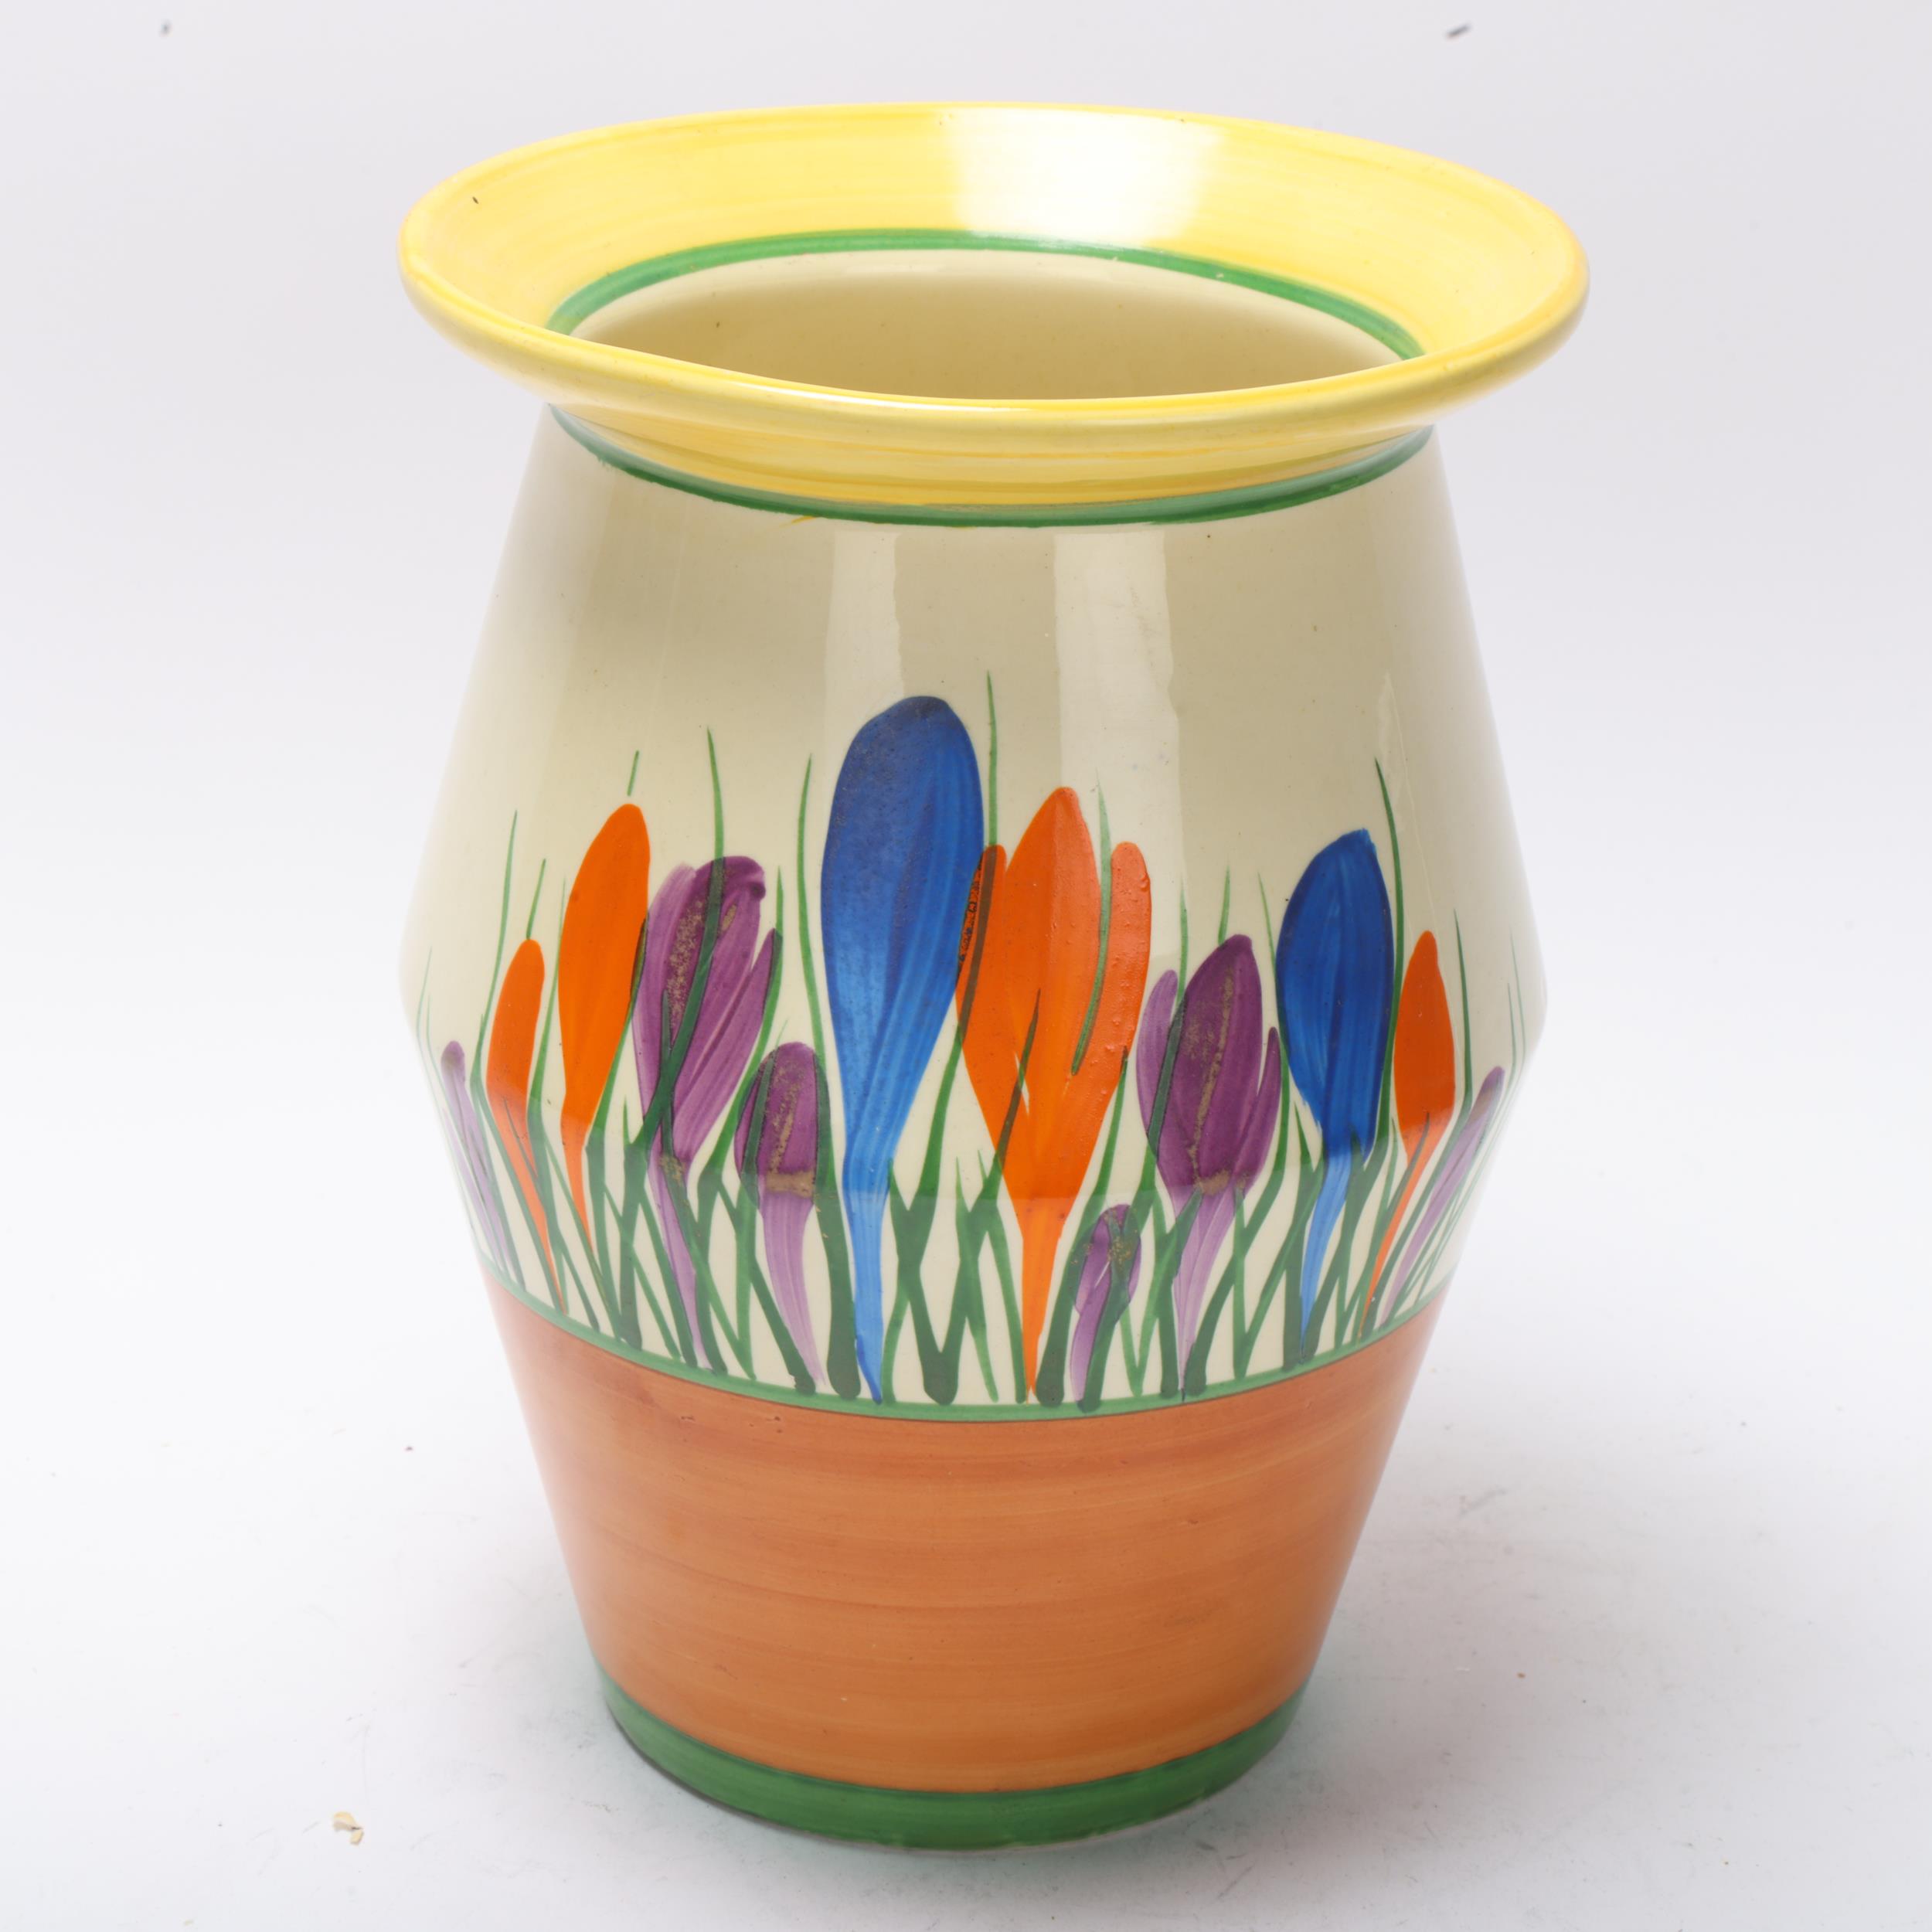 Clarice Cliff Bizarre Crocus pattern vase, height 20cm Good condition, no chips cracks or - Image 2 of 3